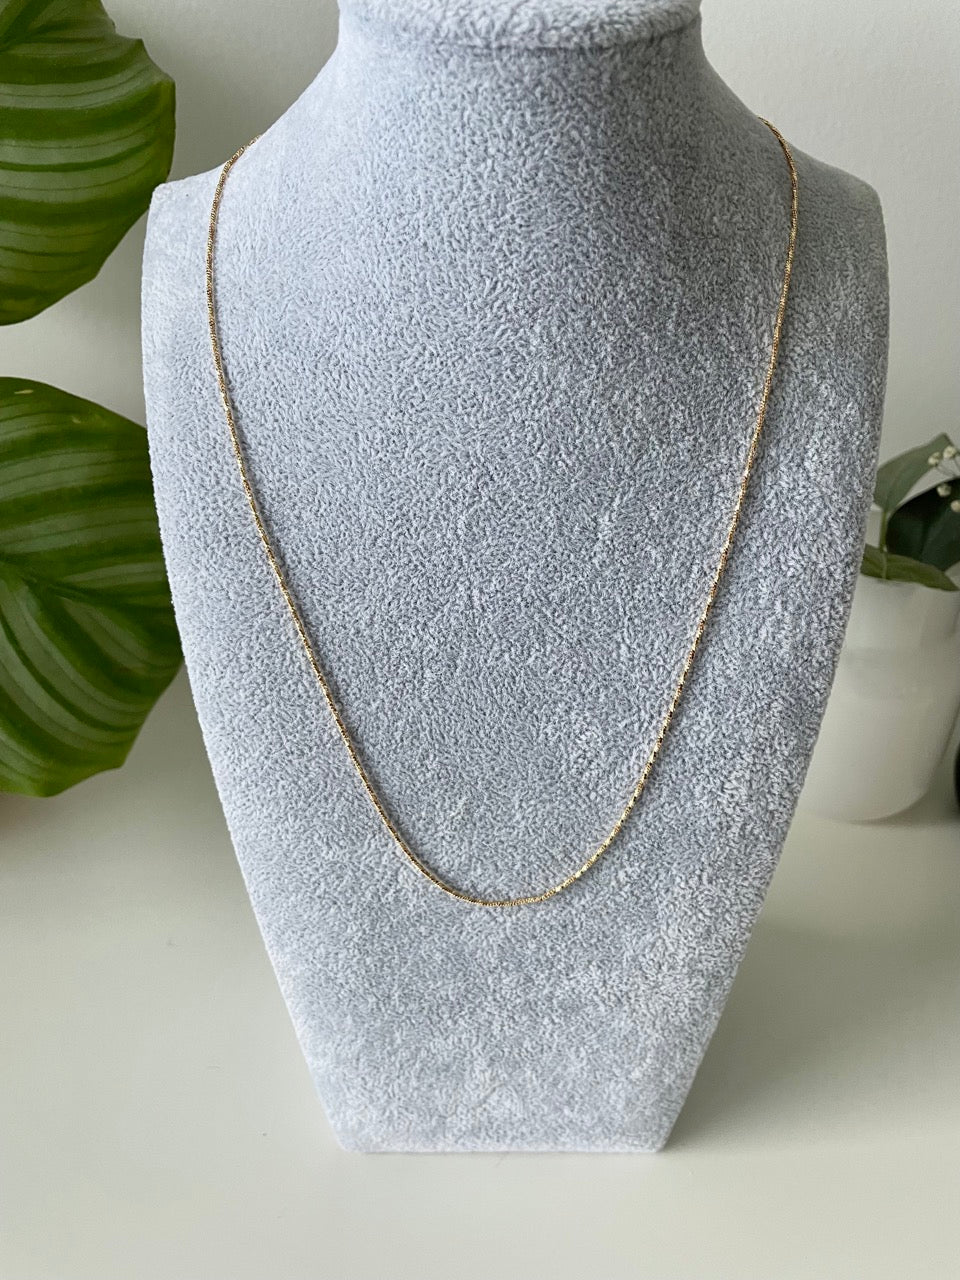 Gold Dainty Twisted Chain